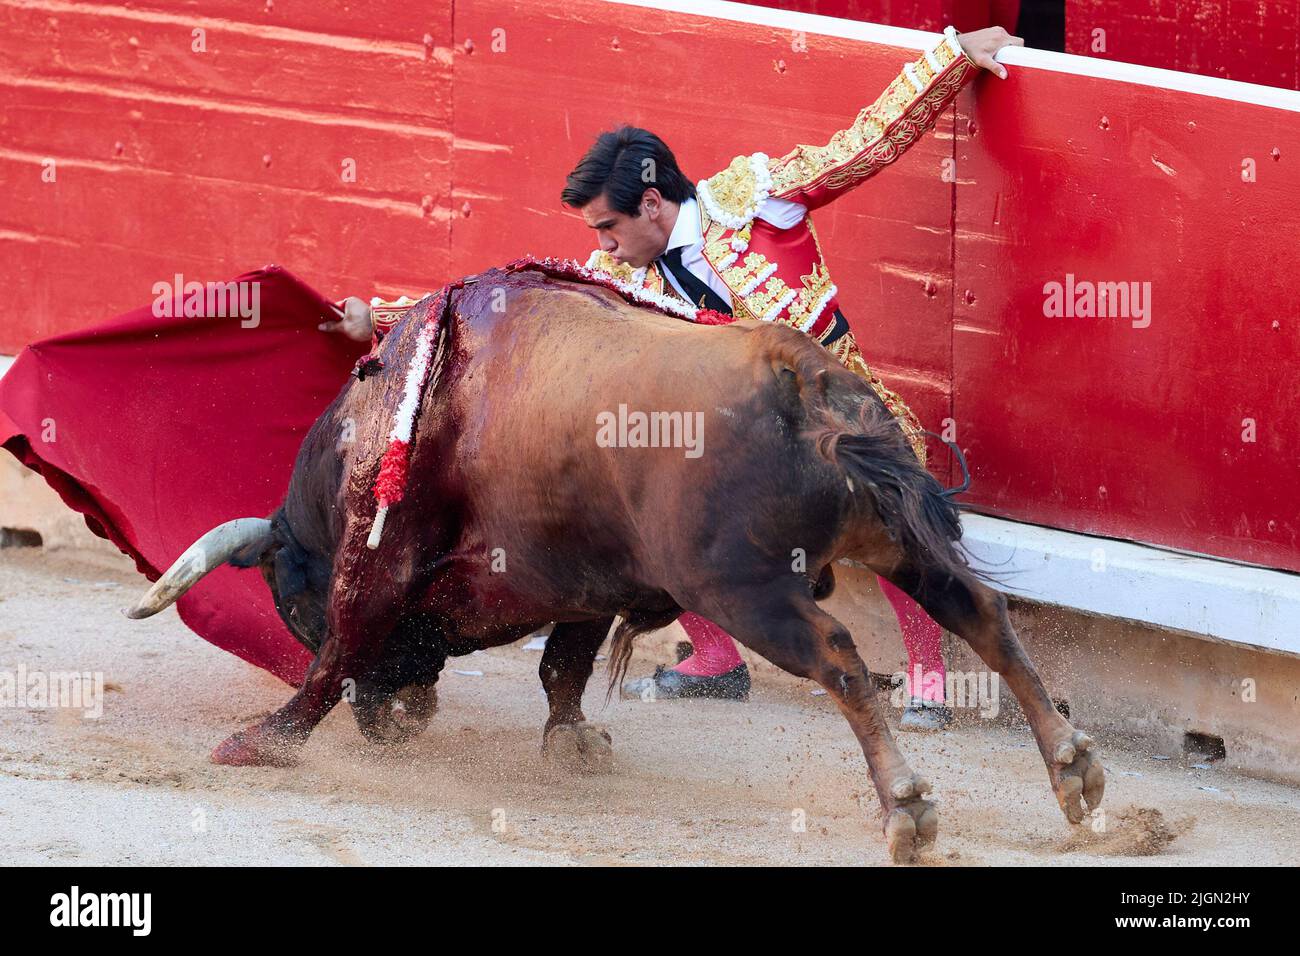 Pamplona, Spain. 11th July, 2022. Jes?s Enrique Colombo, bullfighter seen fighting the third bull of the afternoon during the festivities of San Fermin 2022. Credit: SOPA Images Limited/Alamy Live News Stock Photo